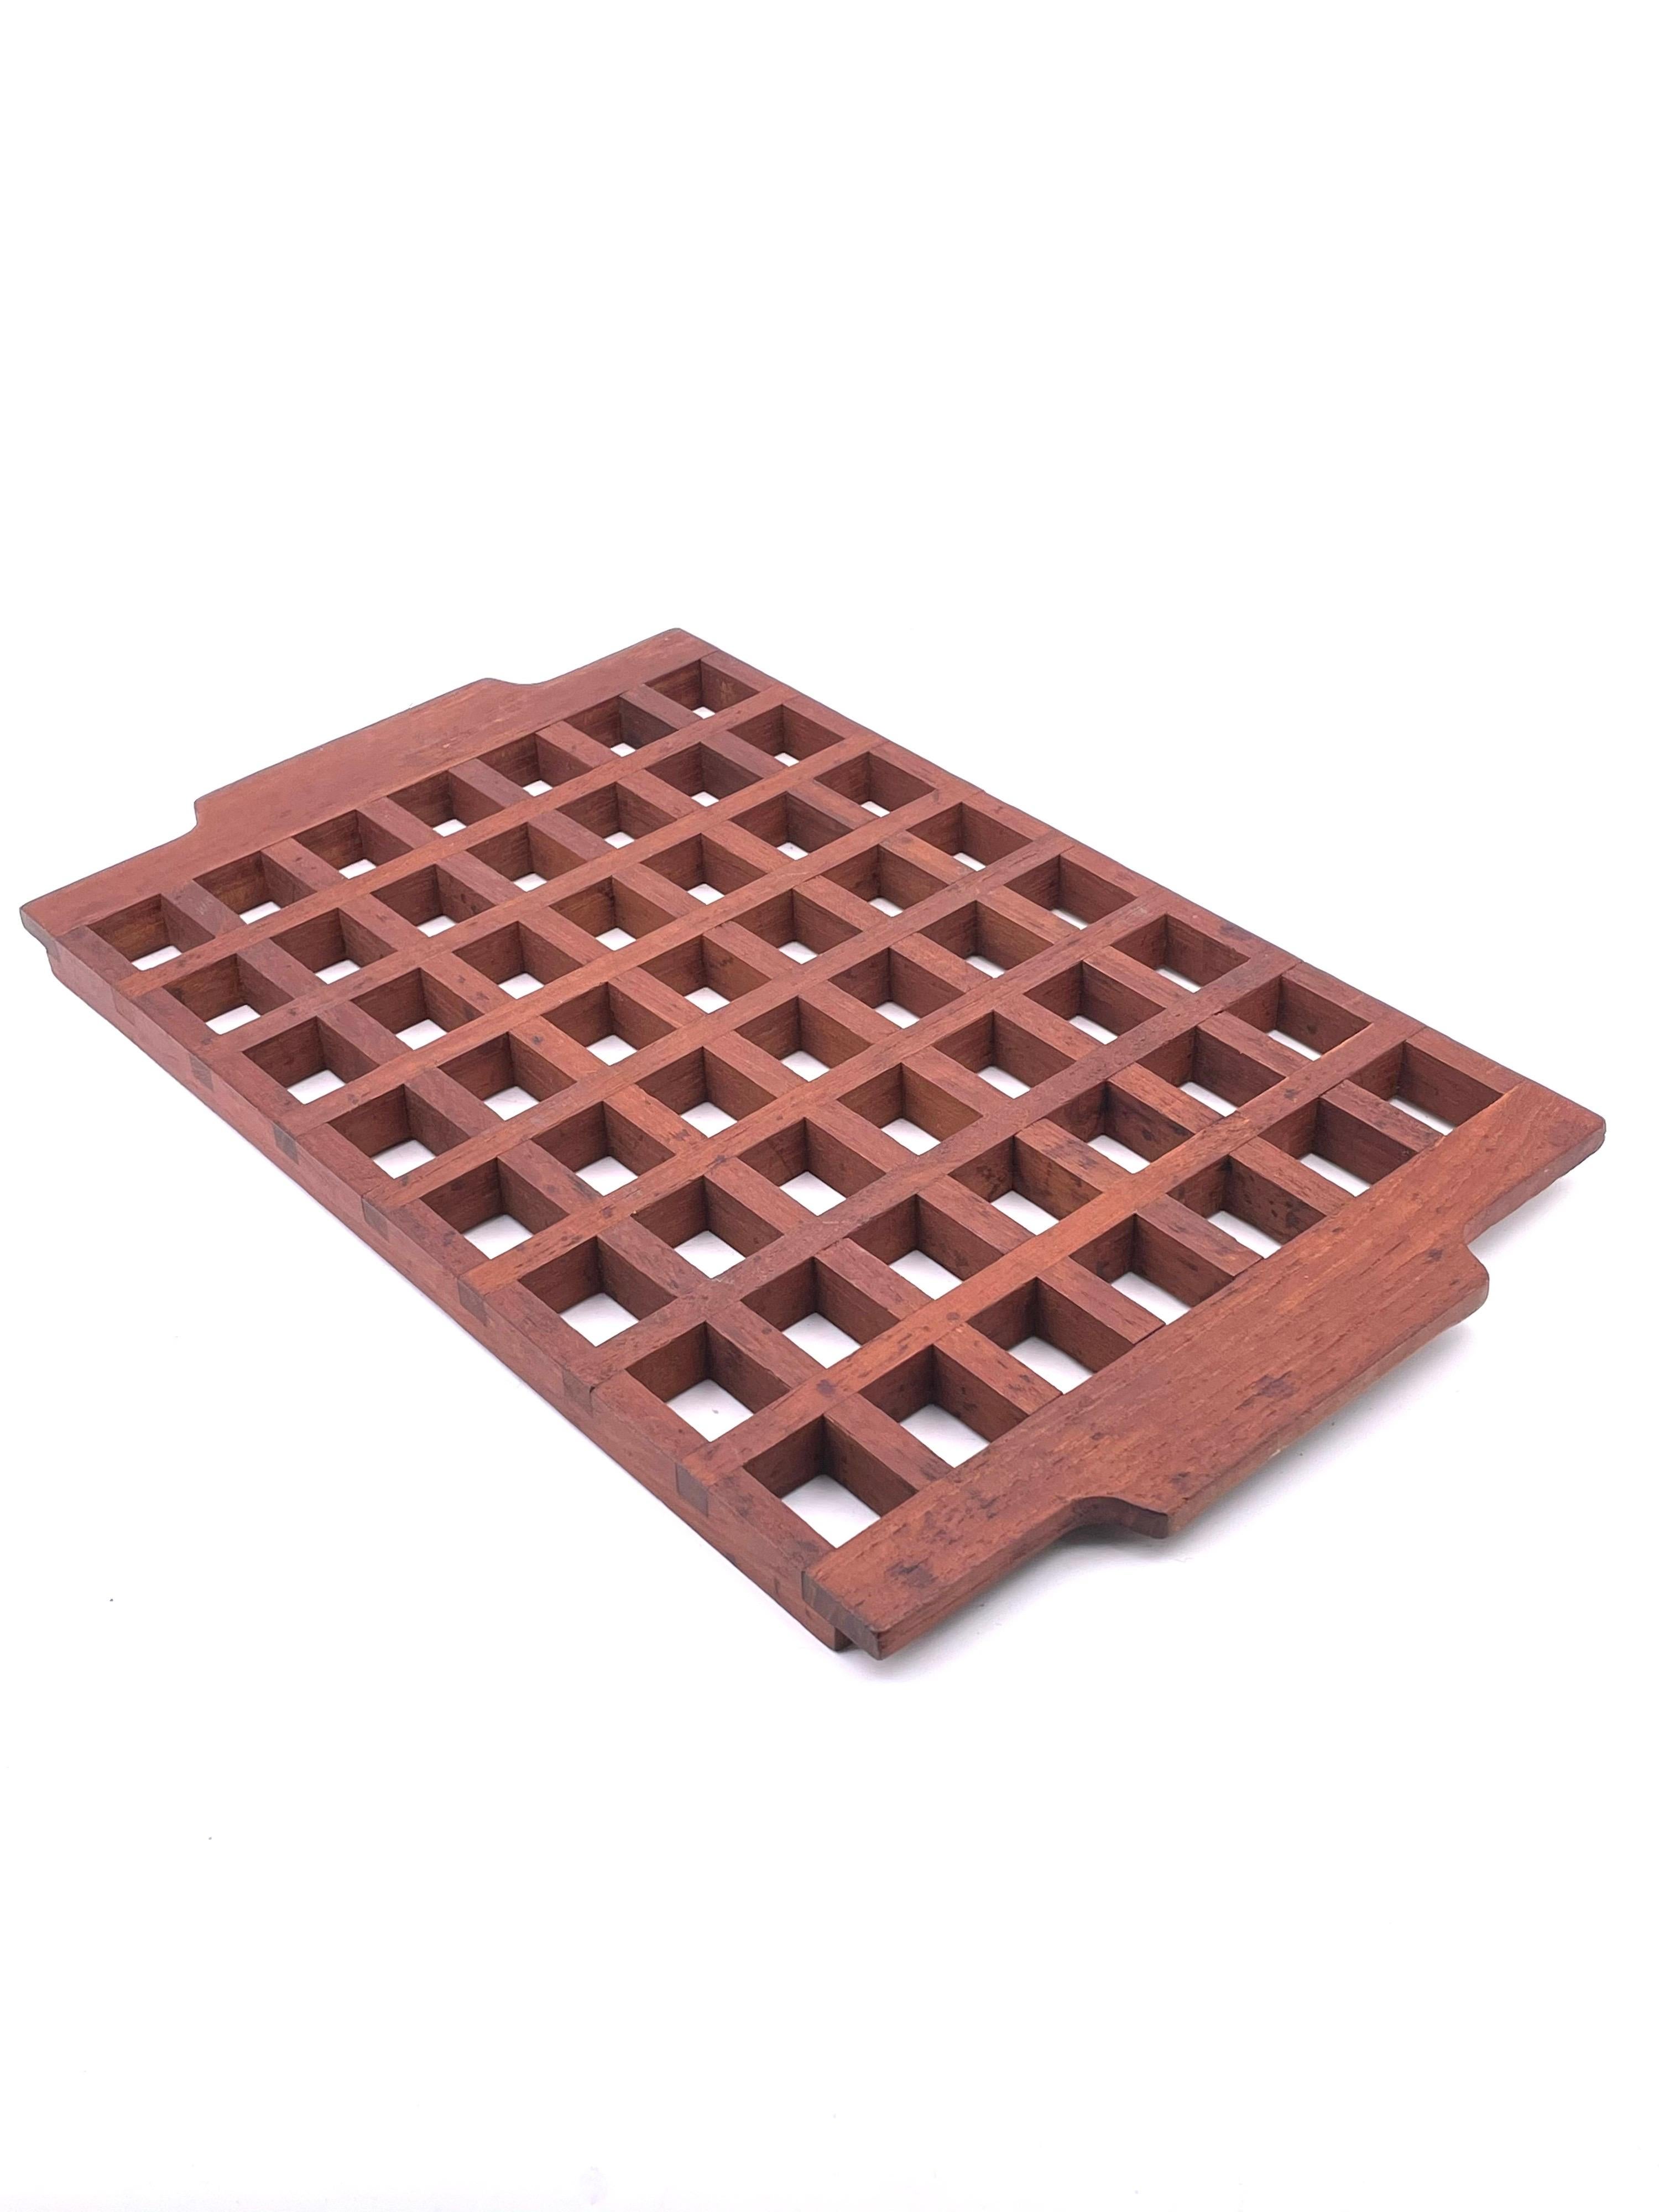 Beautiful design on this large solid teak, tray/trivet, circa 1950s, great condition with raised edges, incredible craftsmanship. Made in Italy by Anri Form.